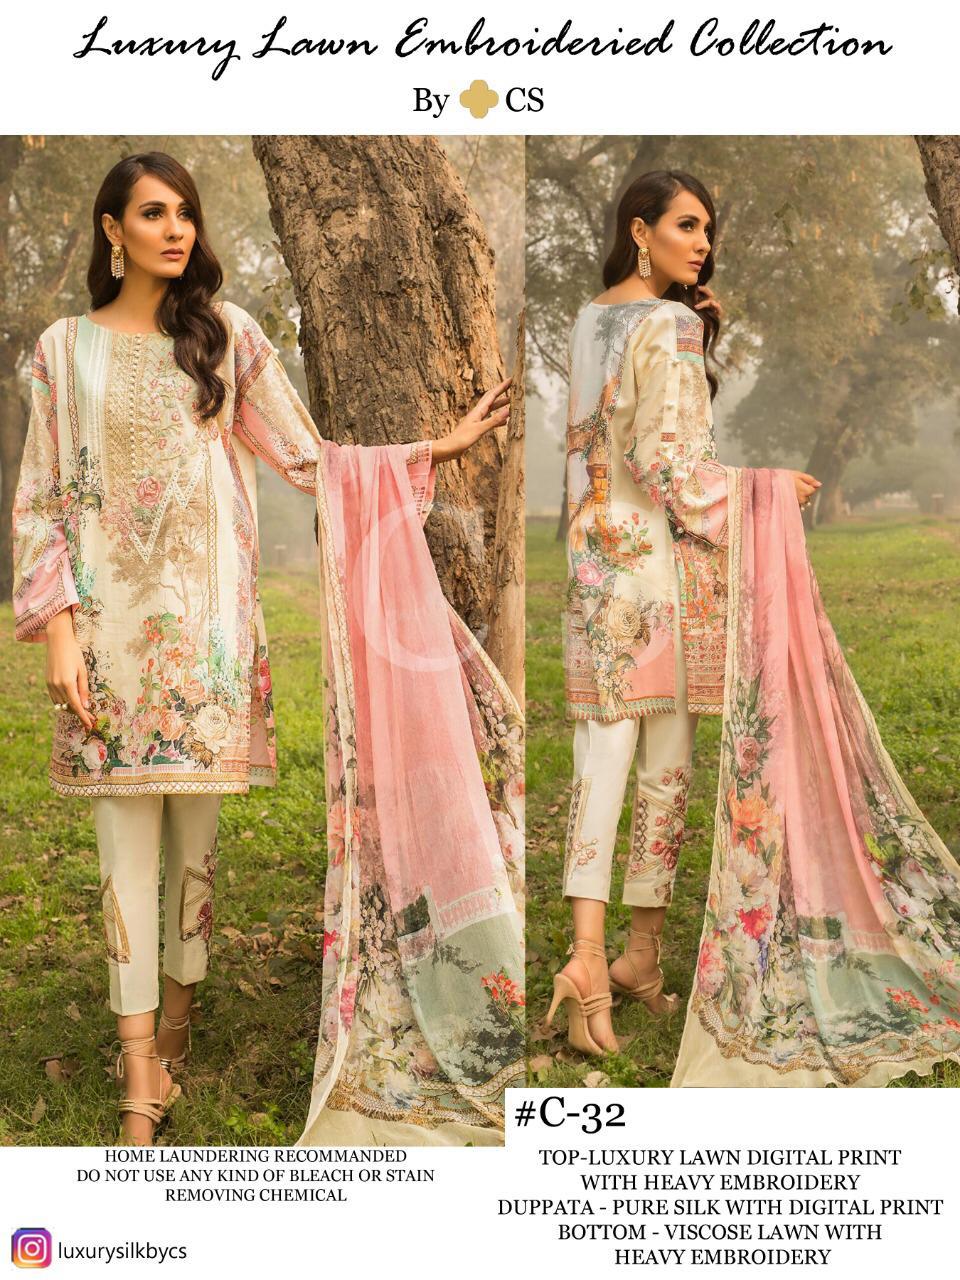 CS LUXURY LAWN C 32 EMBROIDERRIED COLLECTION